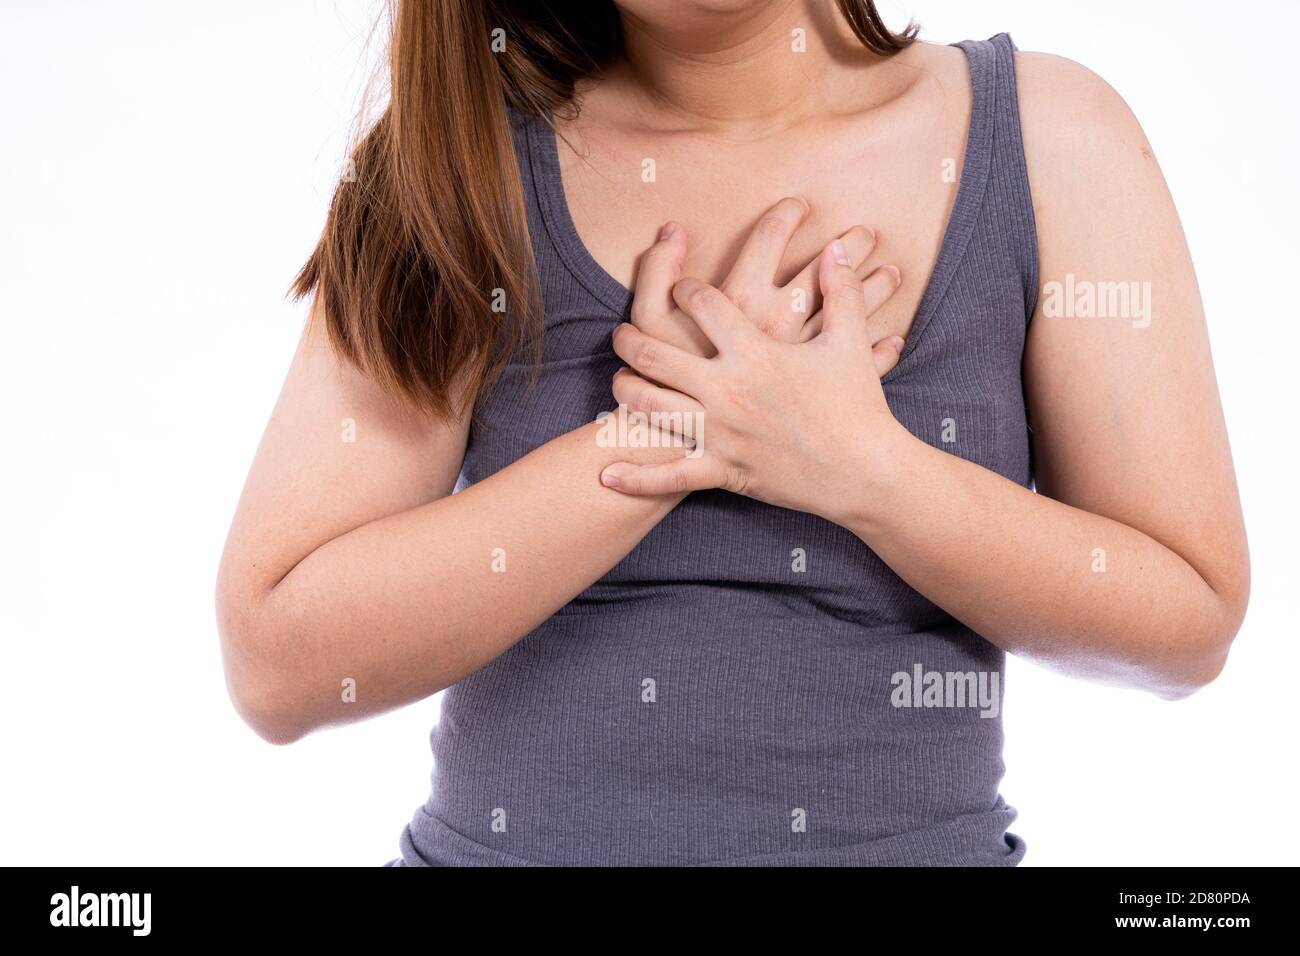 Woman Holding Touching Her Breast. Stock Image - Image of chest